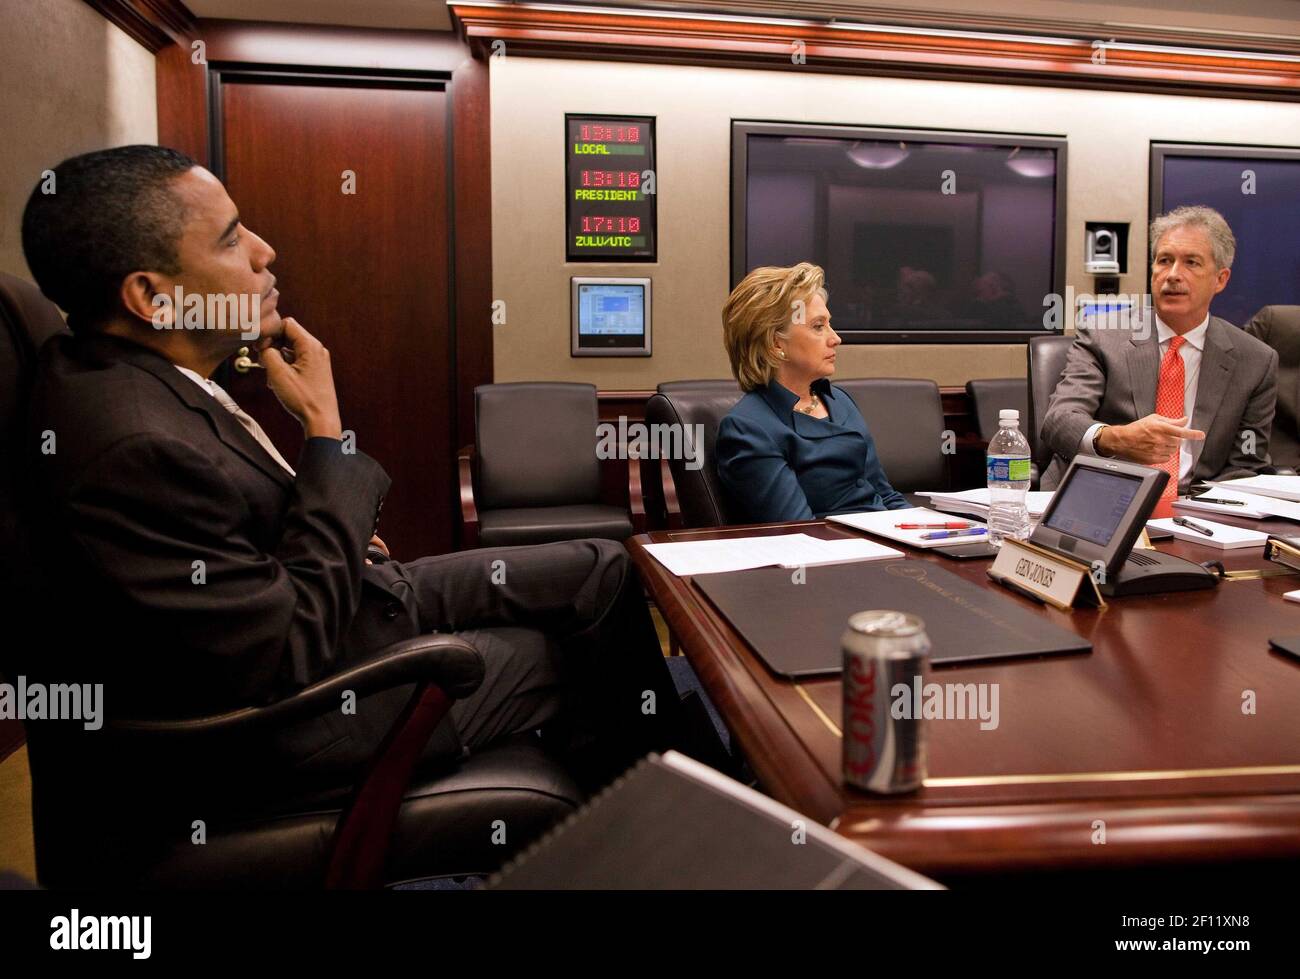 29 September 2009 - Washington, D.C. - President Barack Obama and his national security team meet Sept. 29, 2009, in the Situation Room at the White House with Undersecretary of State Bill Burns, right, as Burns departs for P5+1 talks with Iran in Geneva on Thursday. Secretary of State Hillary Rodham Clinton is seated at center. Photo Credit: Pete Souza / White House/Sipa Press/0909301347 Stock Photo